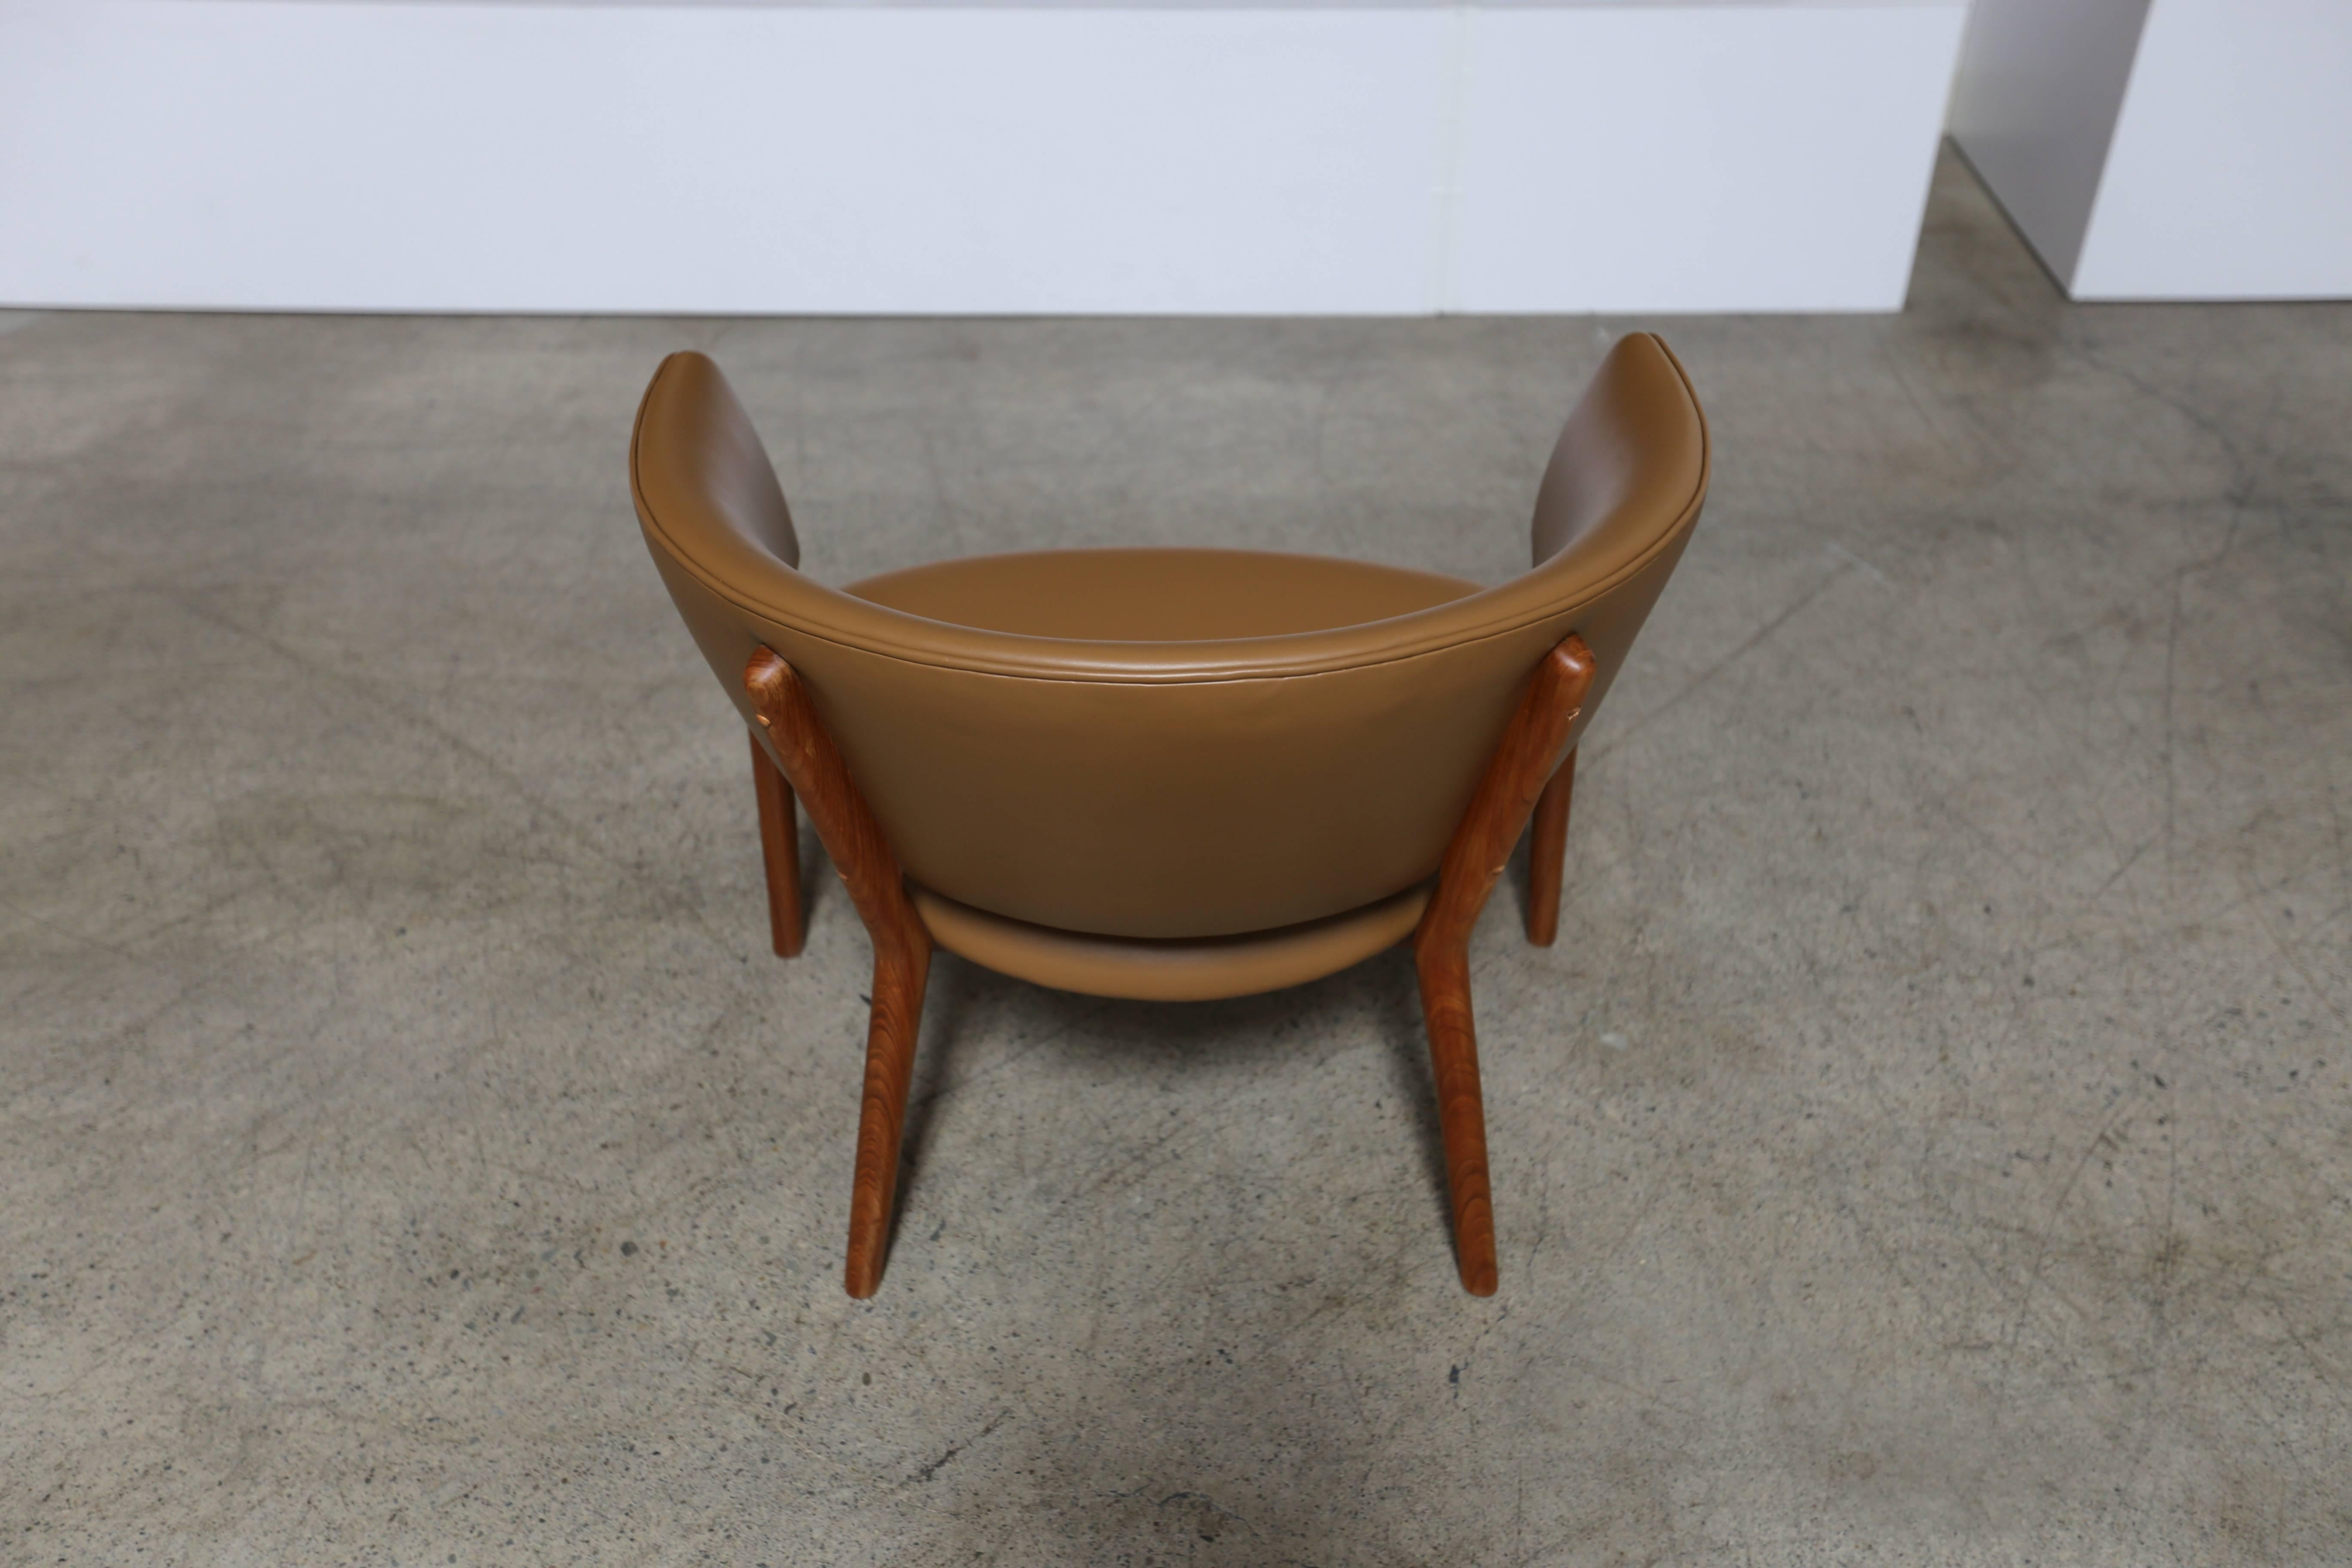 20th Century Pair of Leather and Teak Lounge Chairs by Nanna & Jorgen Ditzel